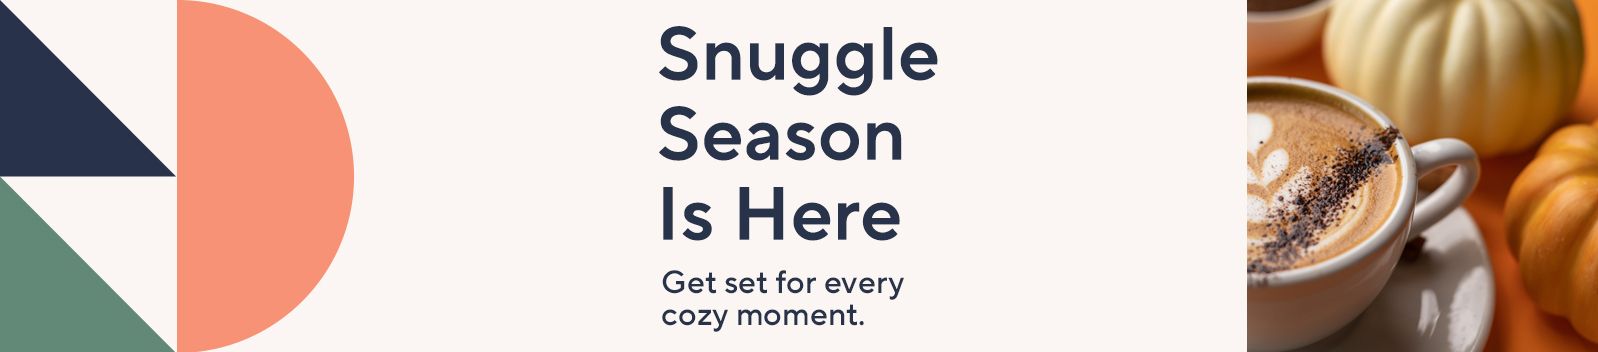 Snuggle Season Is Here. Get set for every cozy moment.